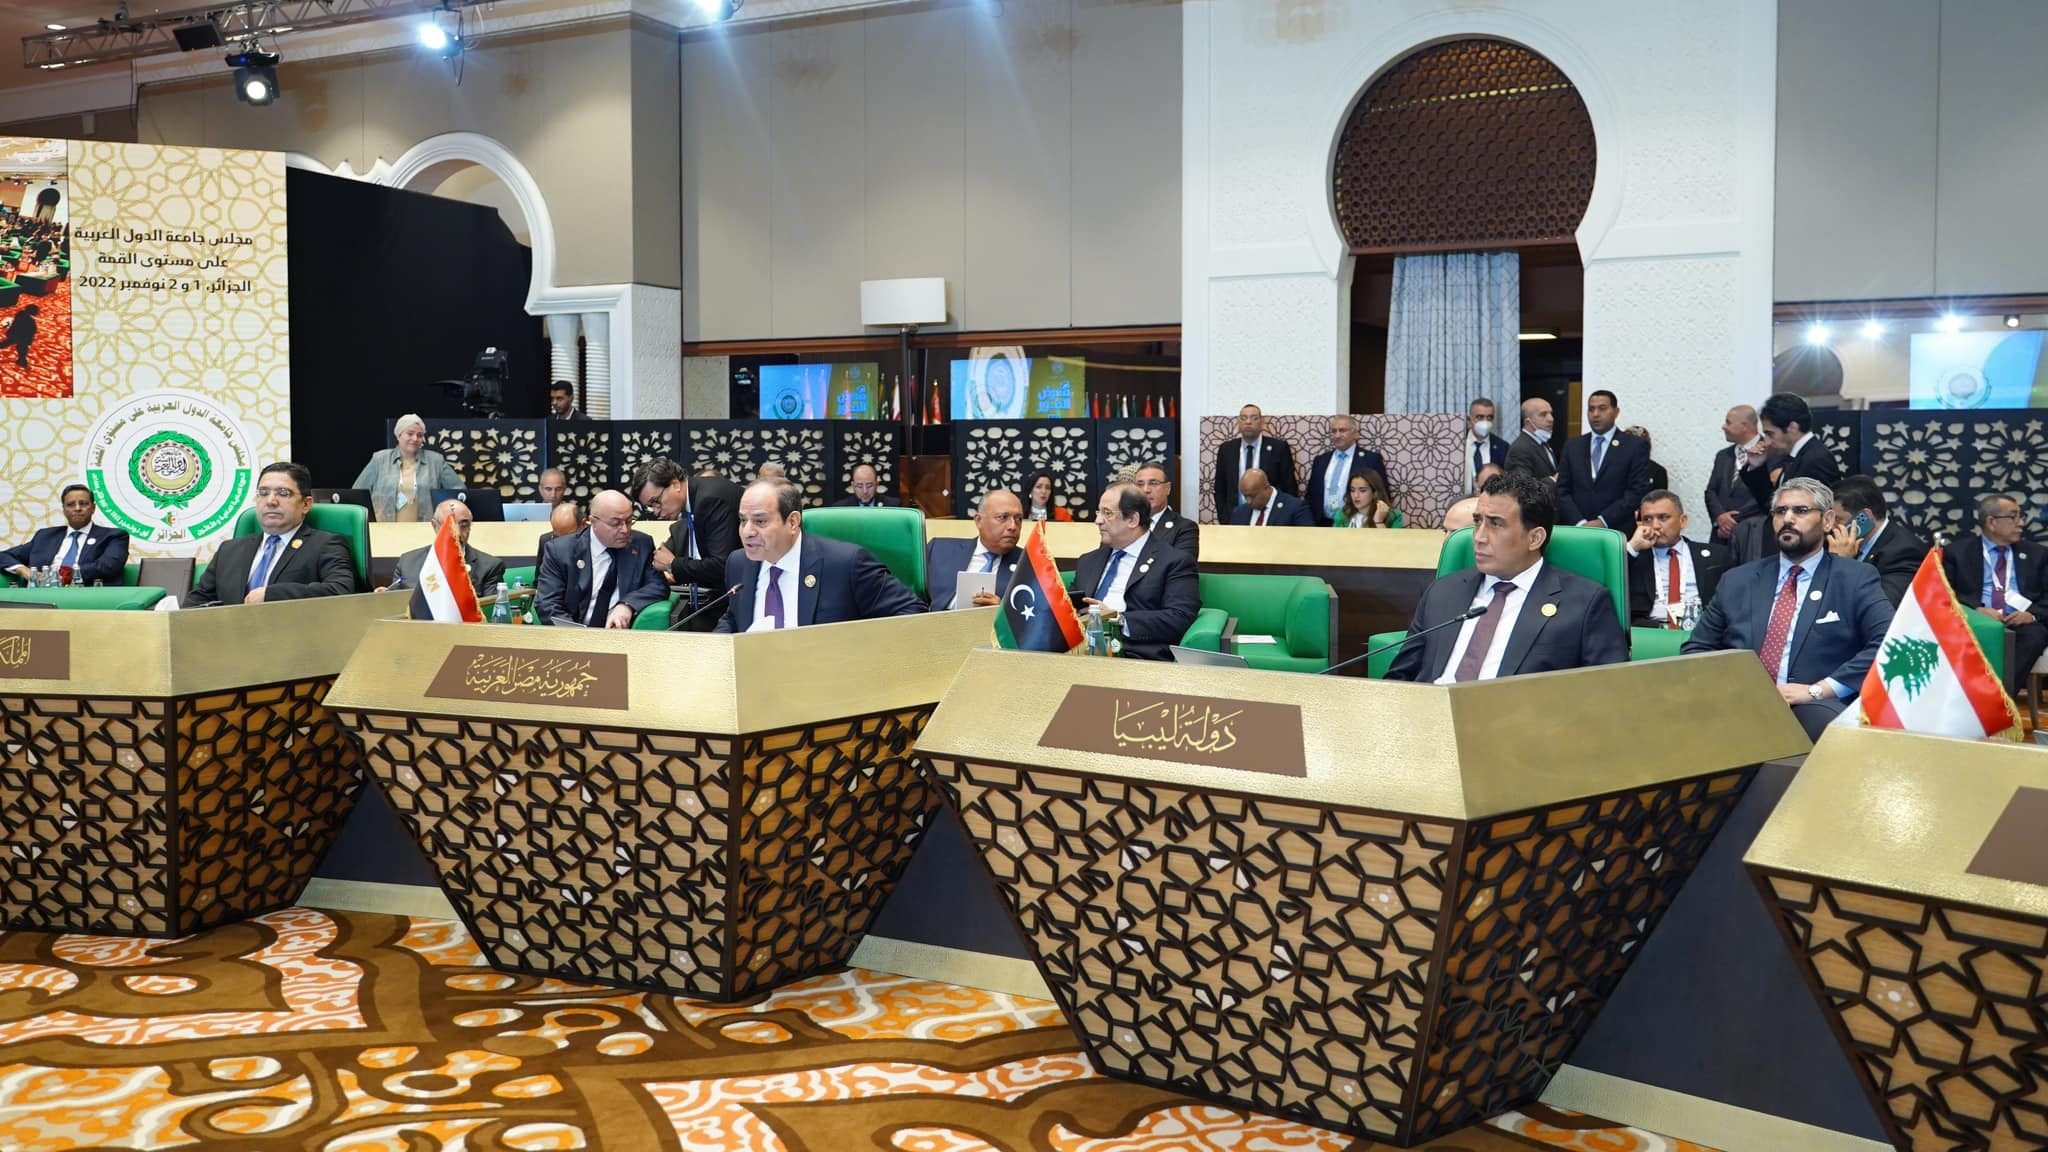 Arab League Summit Calls for Joint Action on Regional, Global Crises